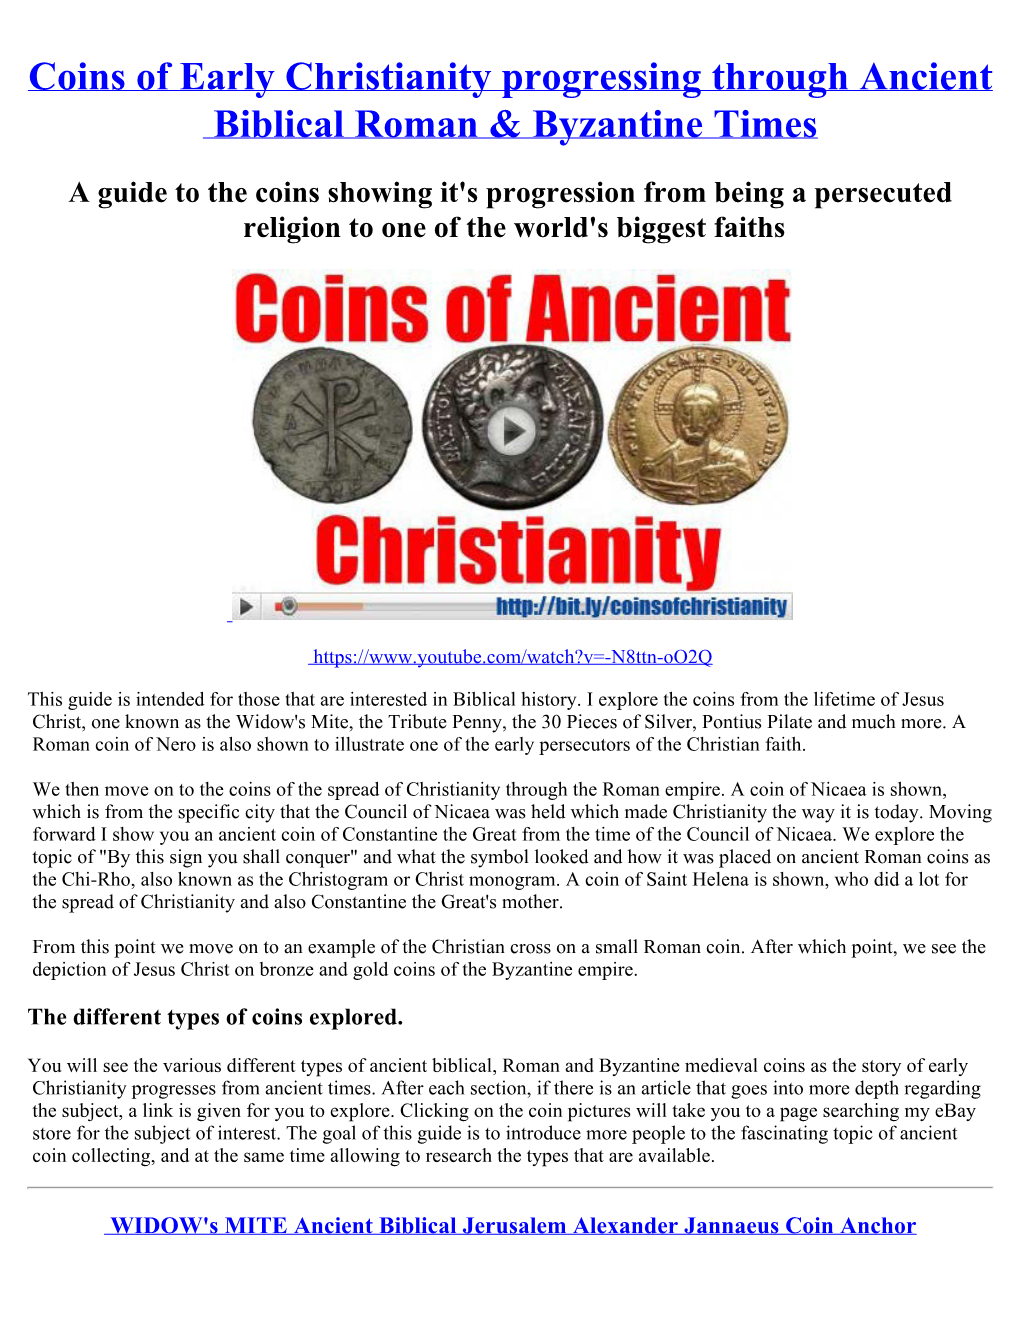 Coins of Early Christianity Progressing Through Ancient Biblical Roman & Byzantine Times